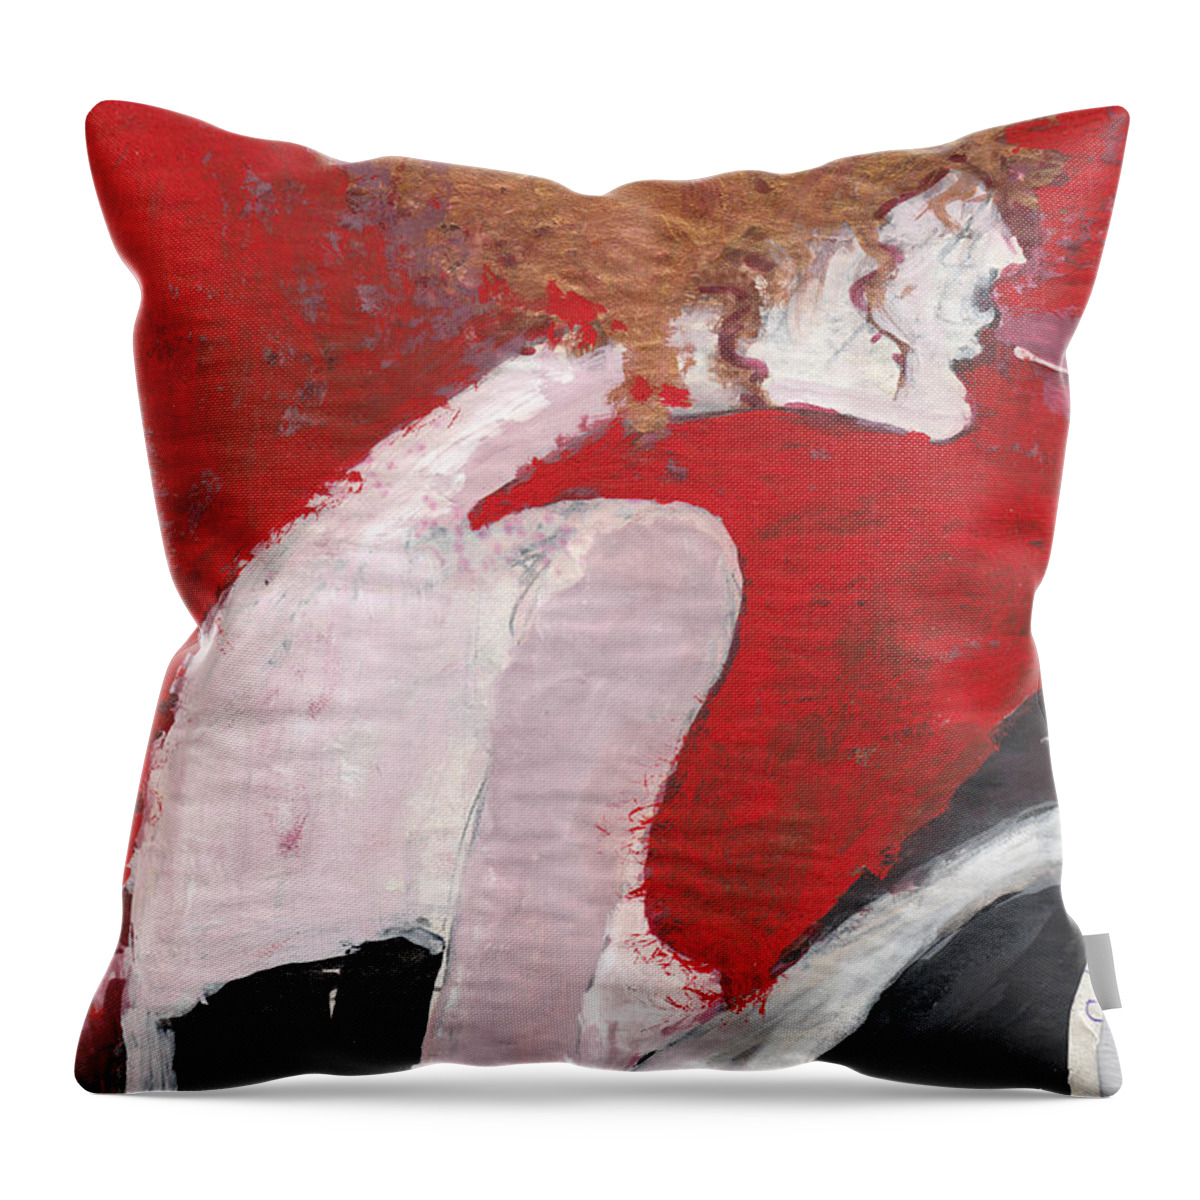 Prostitute Throw Pillow featuring the painting Fresh flesh by Maya Manolova